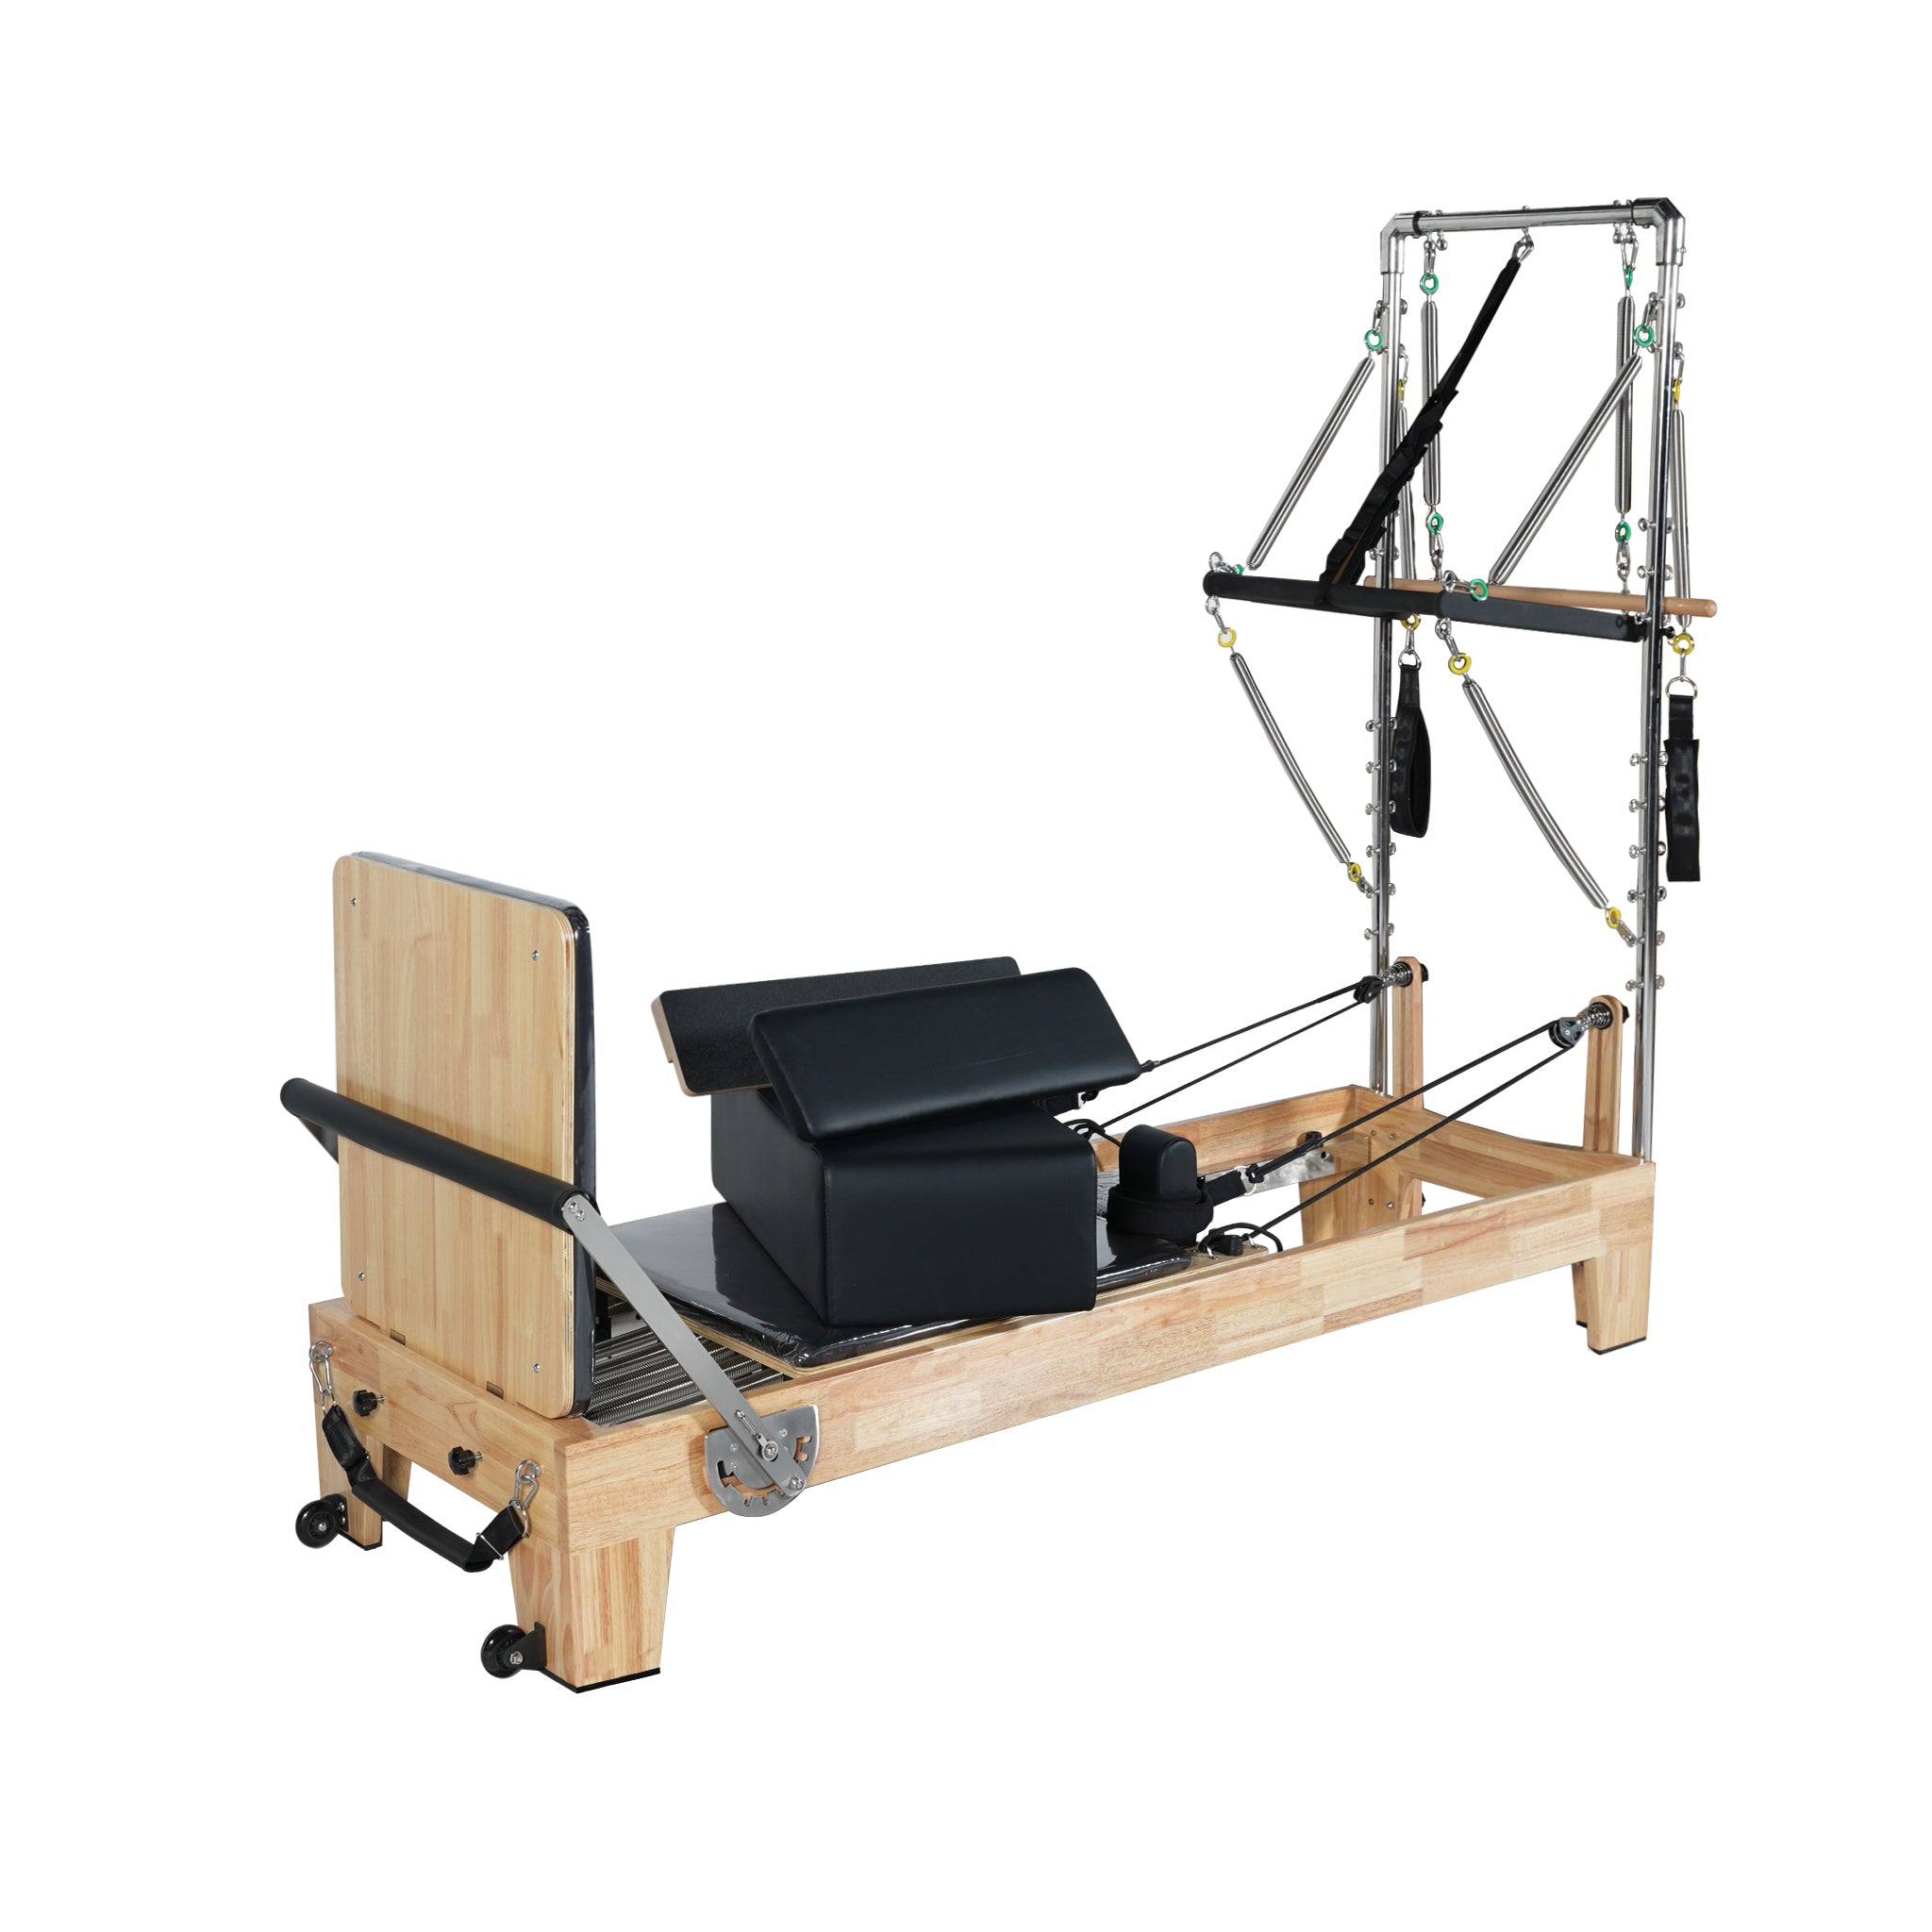 Pilates Reformer With Tower Vintage-Pilates Reformer Machine For Home